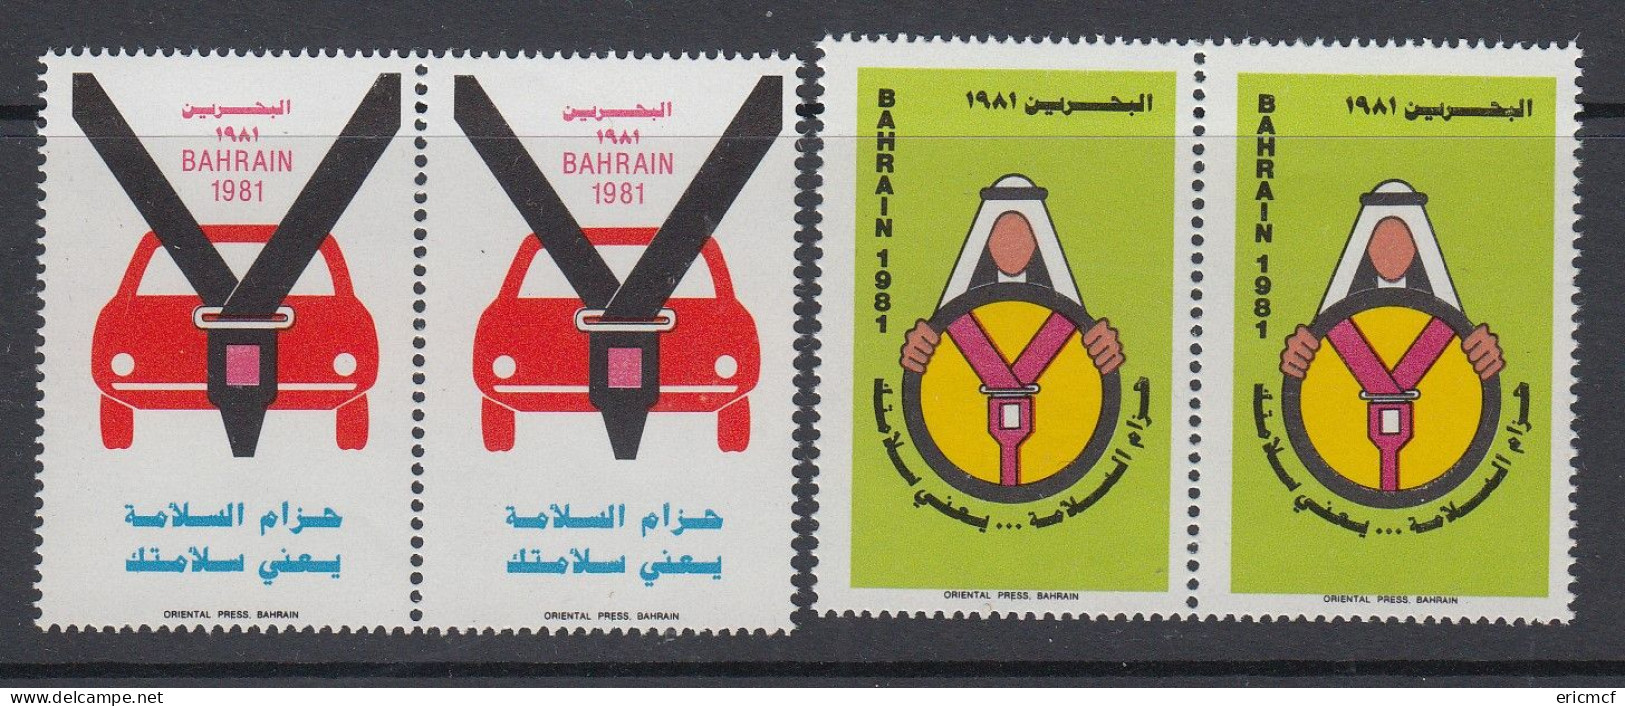 Bahrain 1981 Road Safety Stamps/Labels Cinderella MNH Pairs - Bahrain (1965-...)